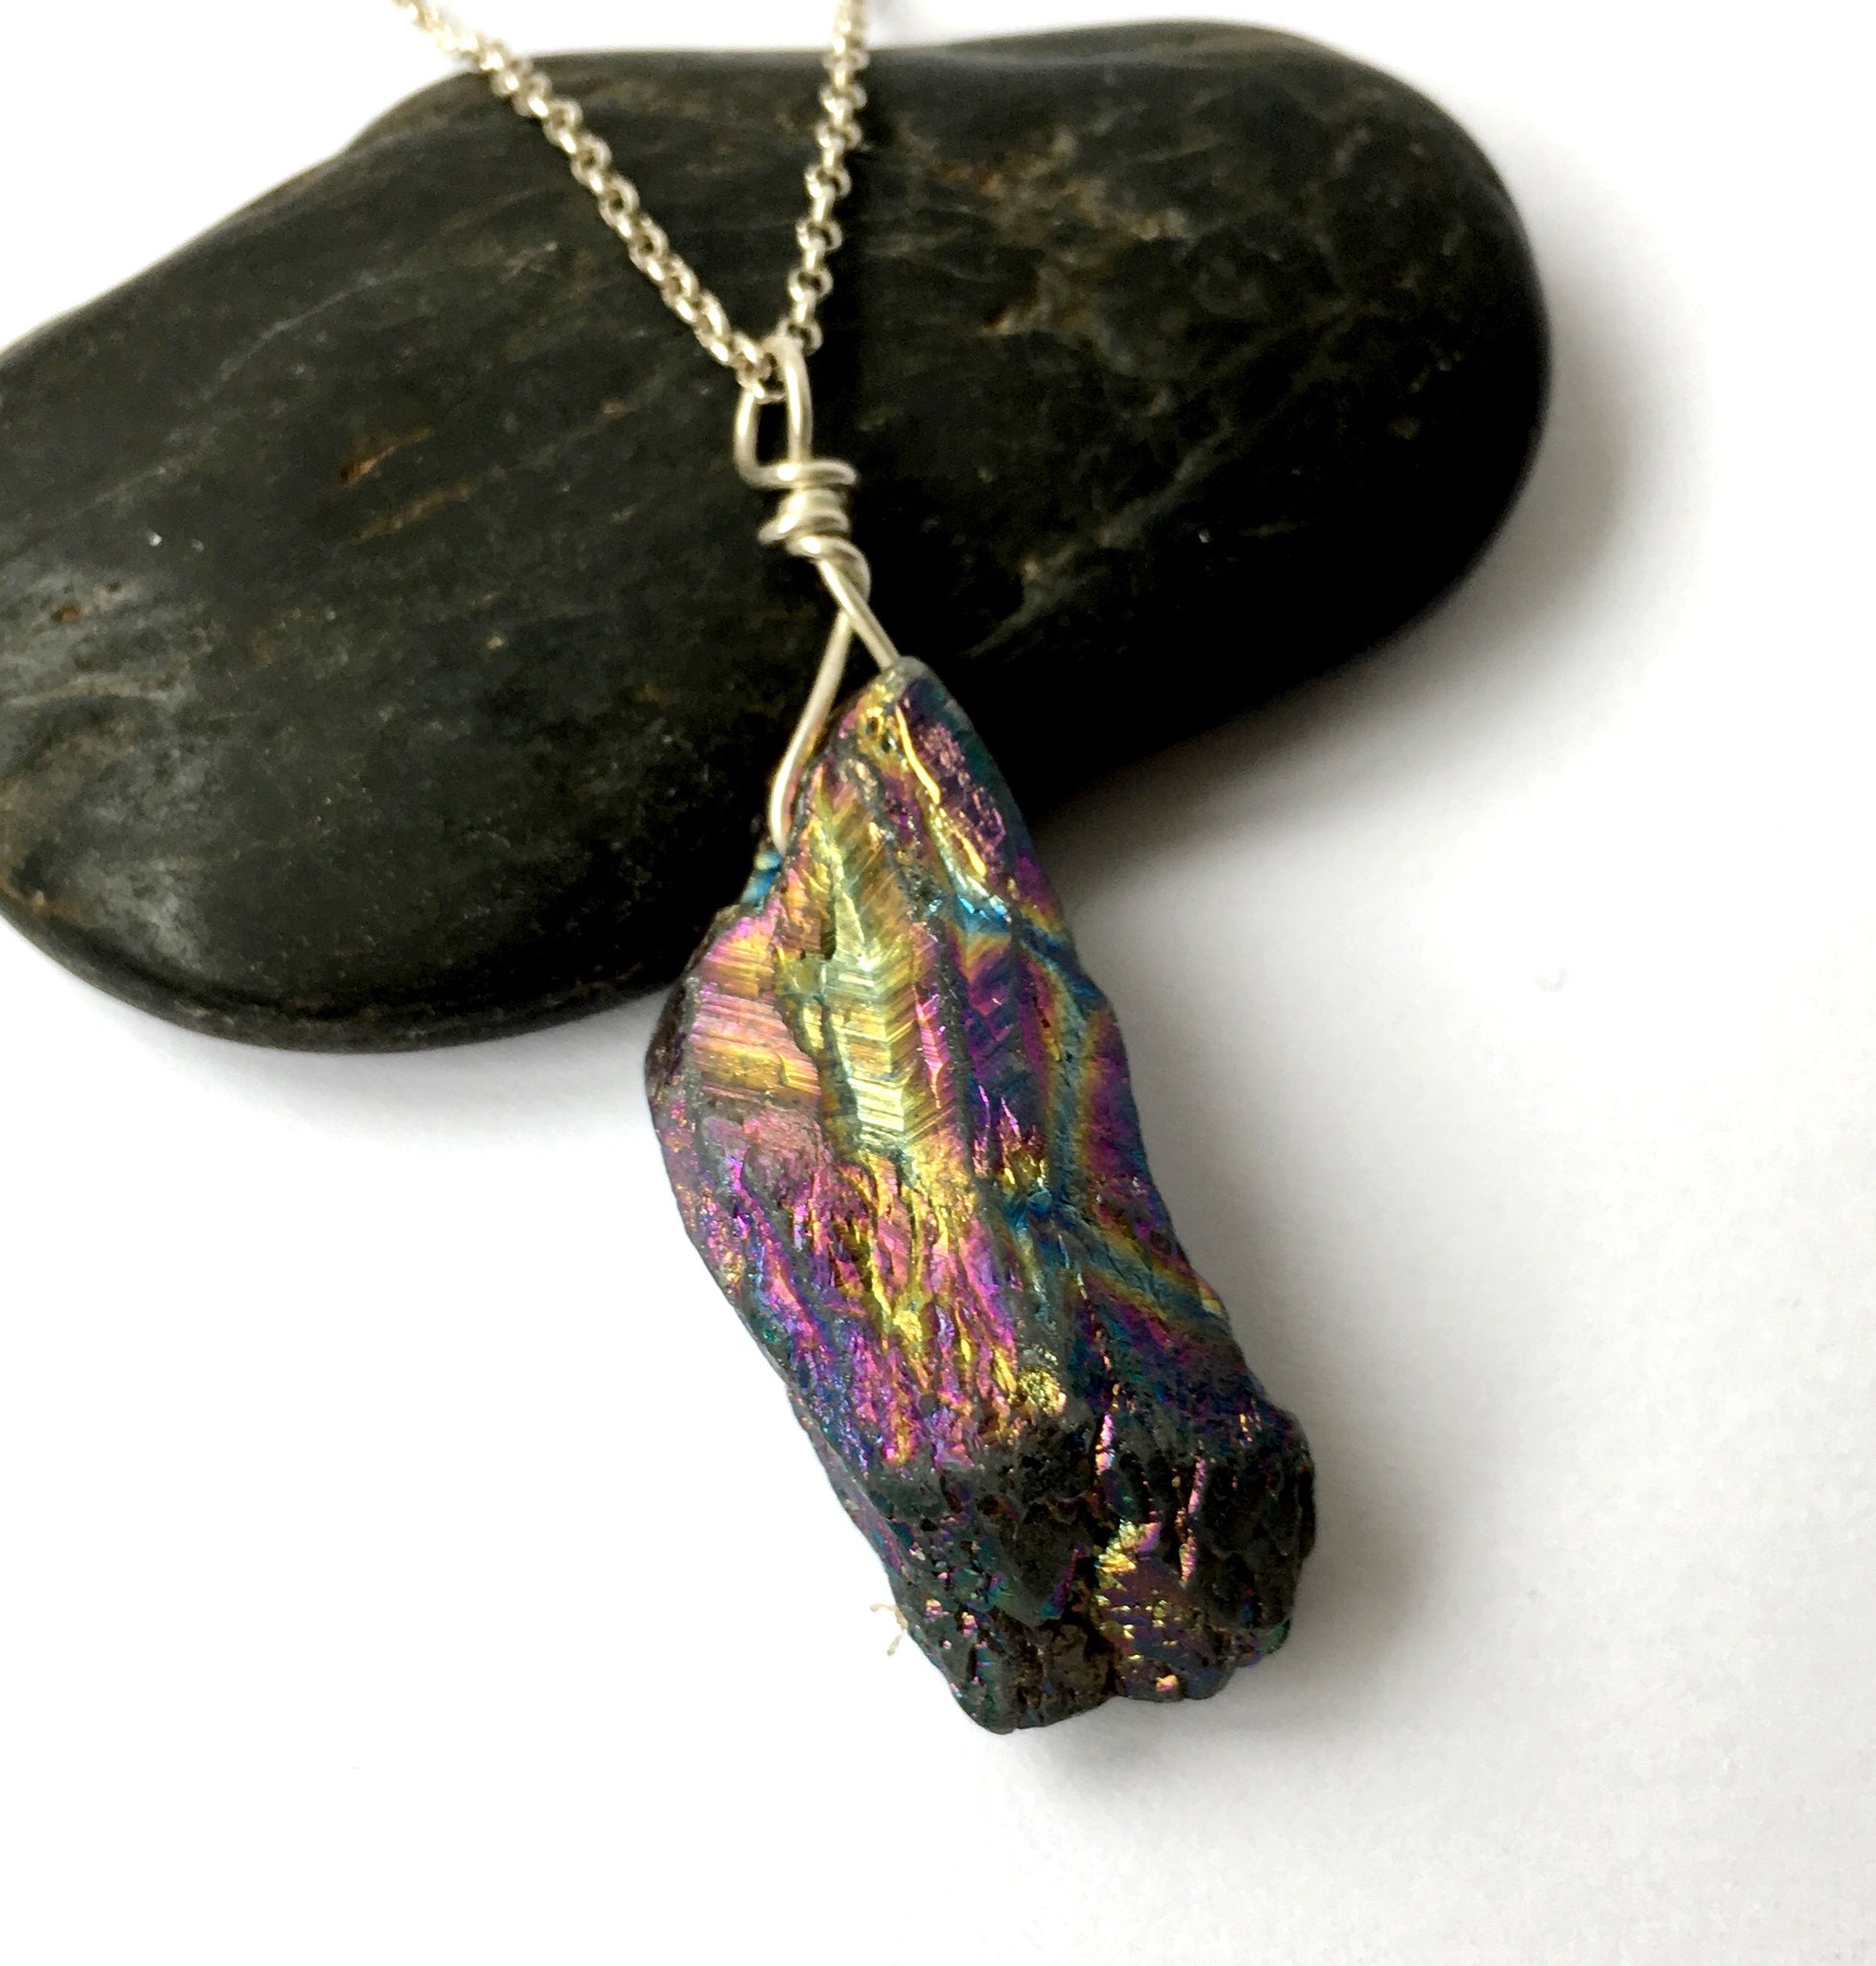 Rainbow Rock Crystal Quartz Sterling Silver Pendant Necklace - Glitter and Gem Jewellery